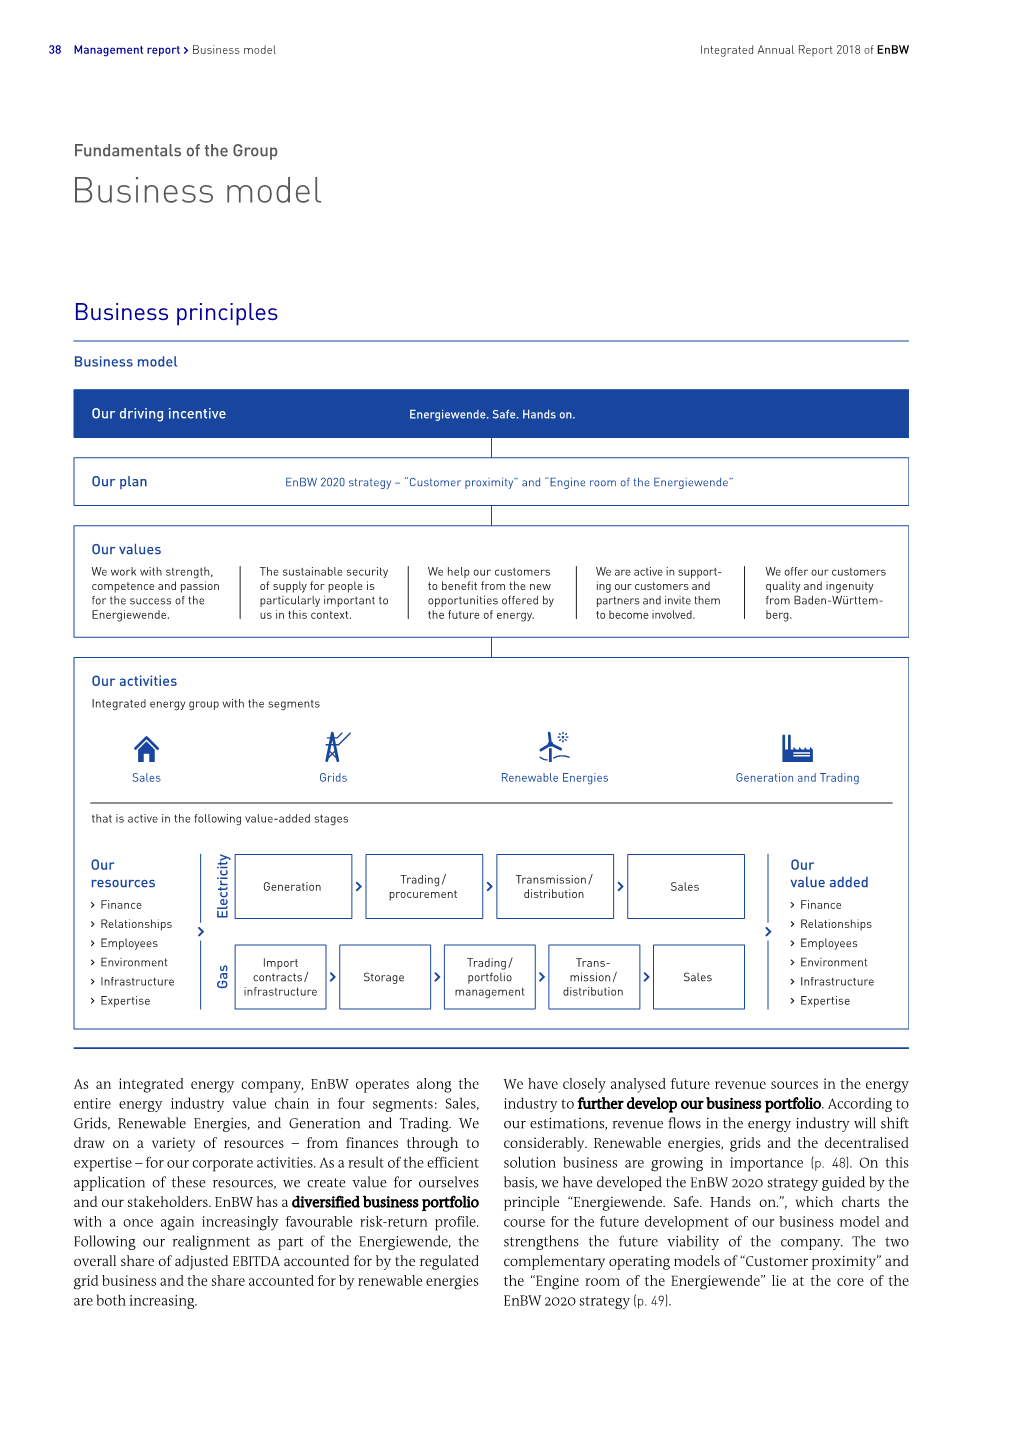 Business Model Integrated Annual Report 2018 of Enbw